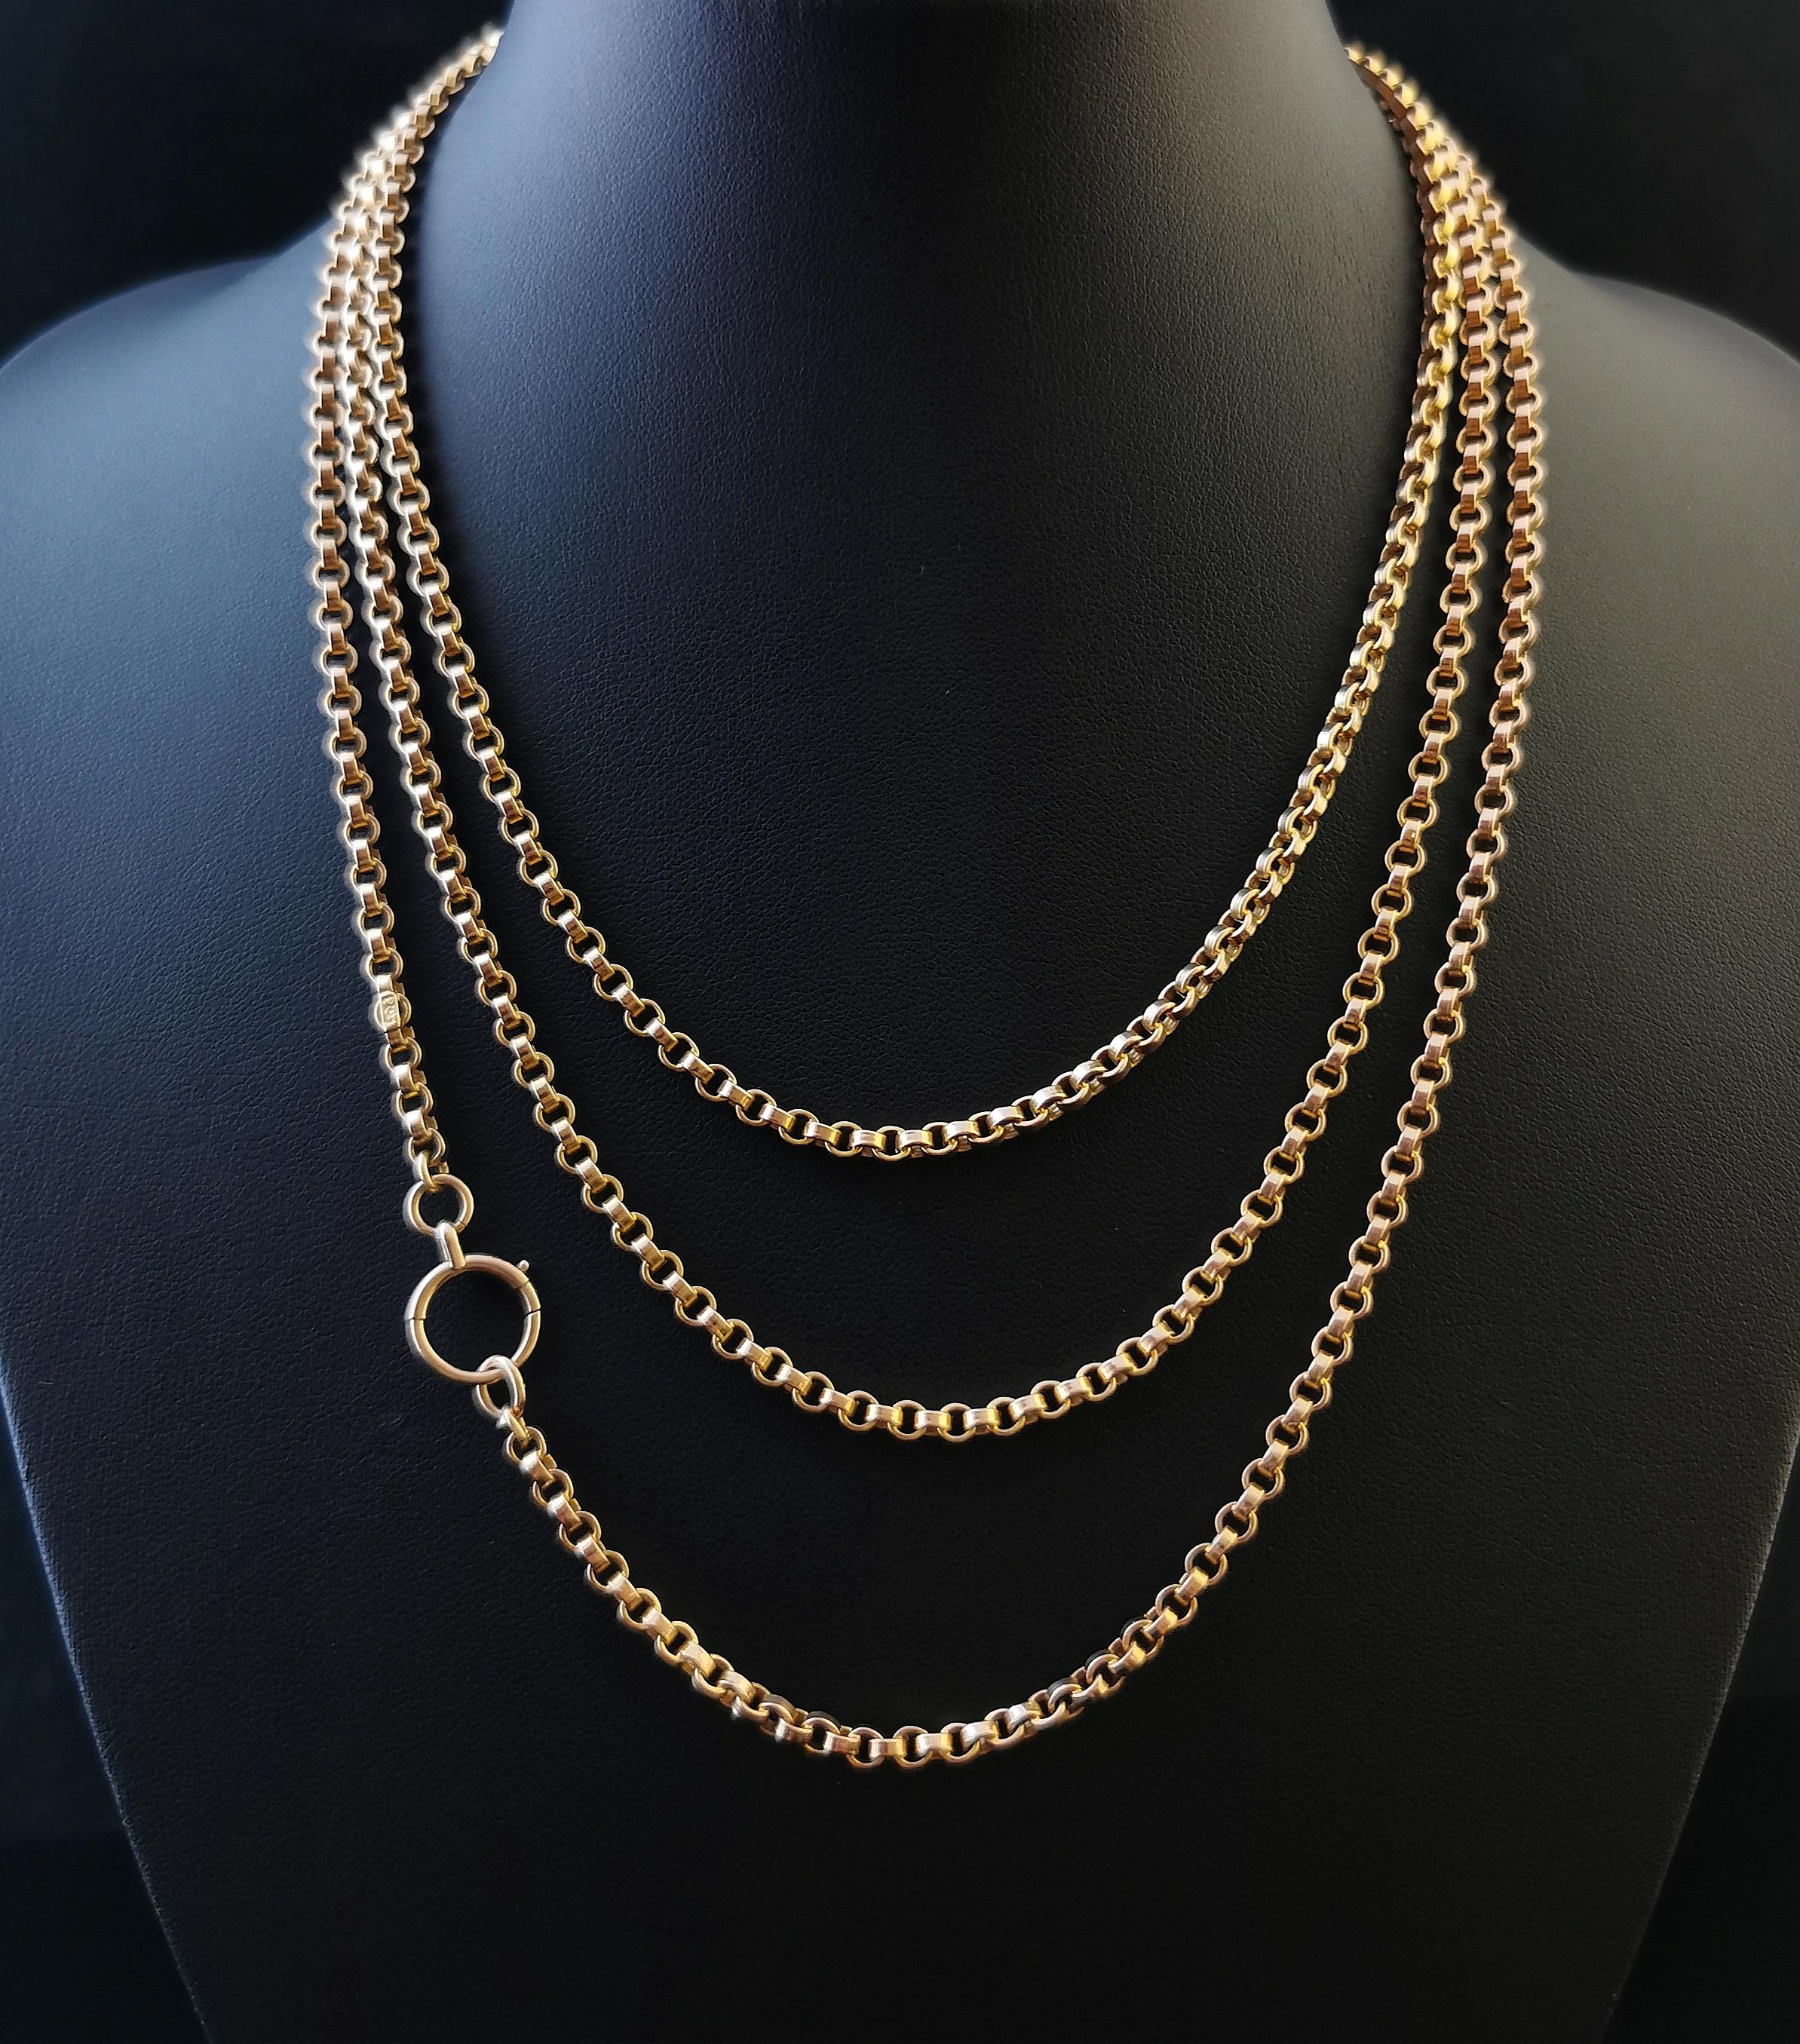 A gorgeous antique, late Victorian 9kt yellow gold longuard chain also known as a muff chain necklace.

This long chain has a lovely rich old yellow gold glow to it with compact but chunky rolo links and a superb 55